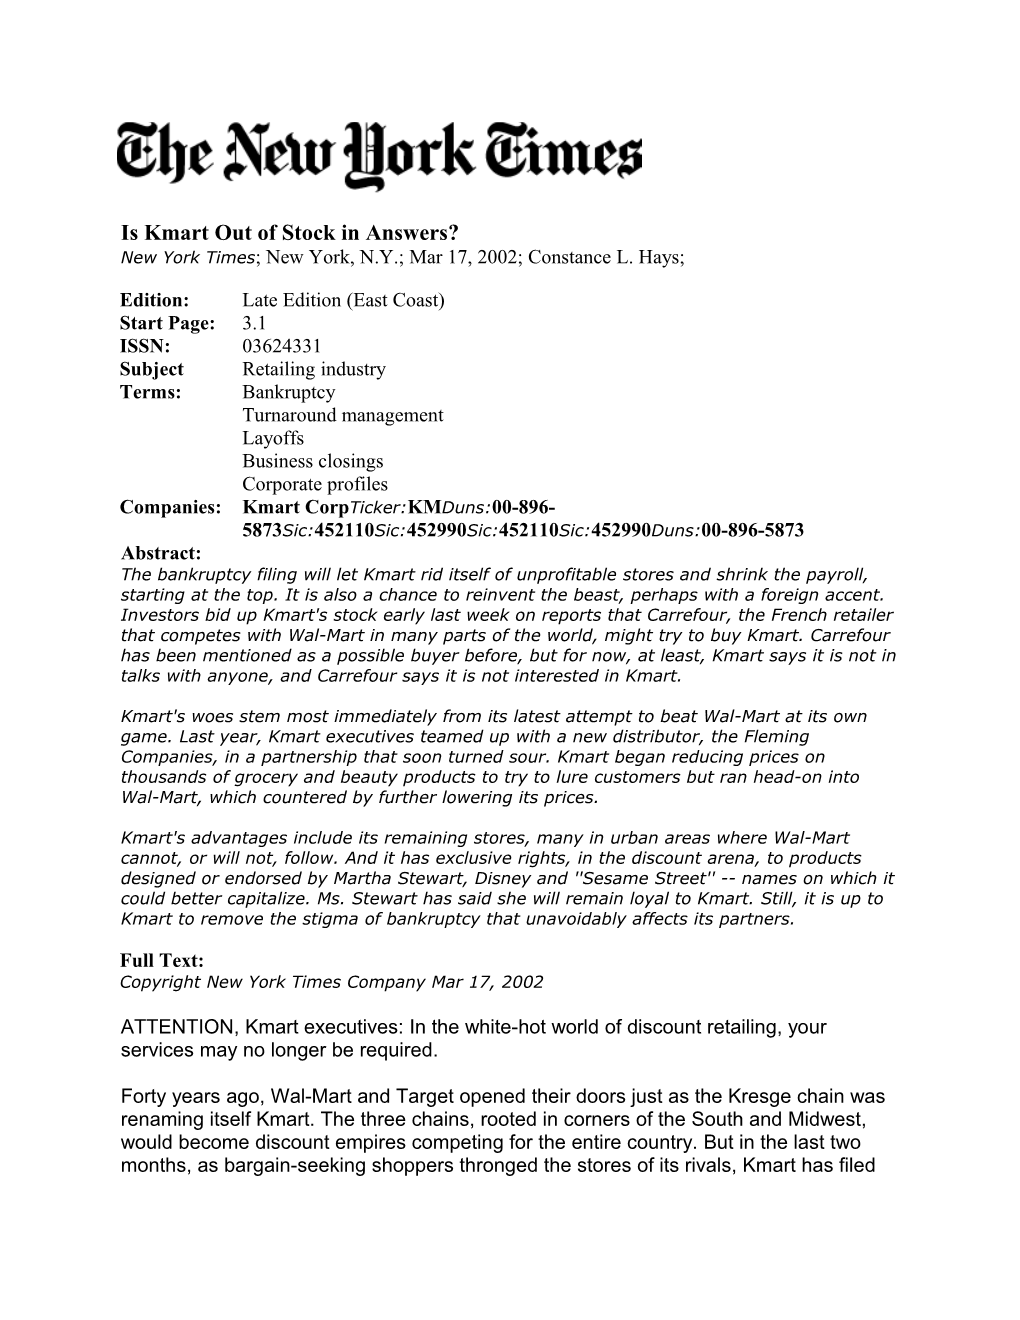 Is Kmart out of Stock in Answers? New York Times; New York, N.Y.; Mar 17, 2002; Constance